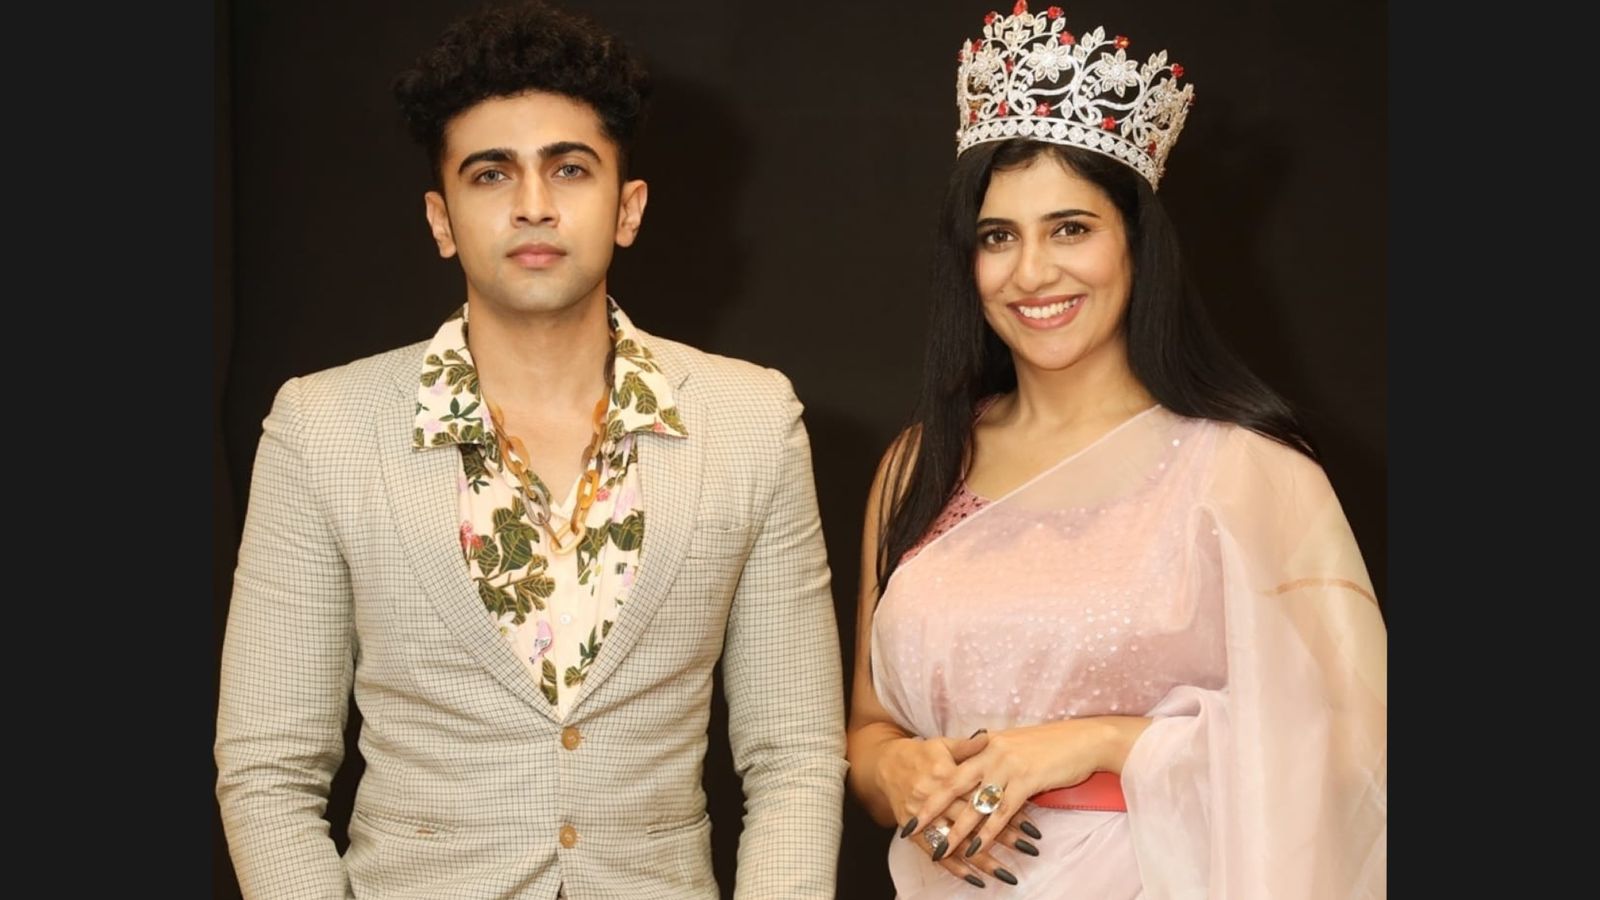 Bengaluru's youth Heartthrob Sujay anjan makes dapper appearance for Mr and Miss Glamorous model India-2022.